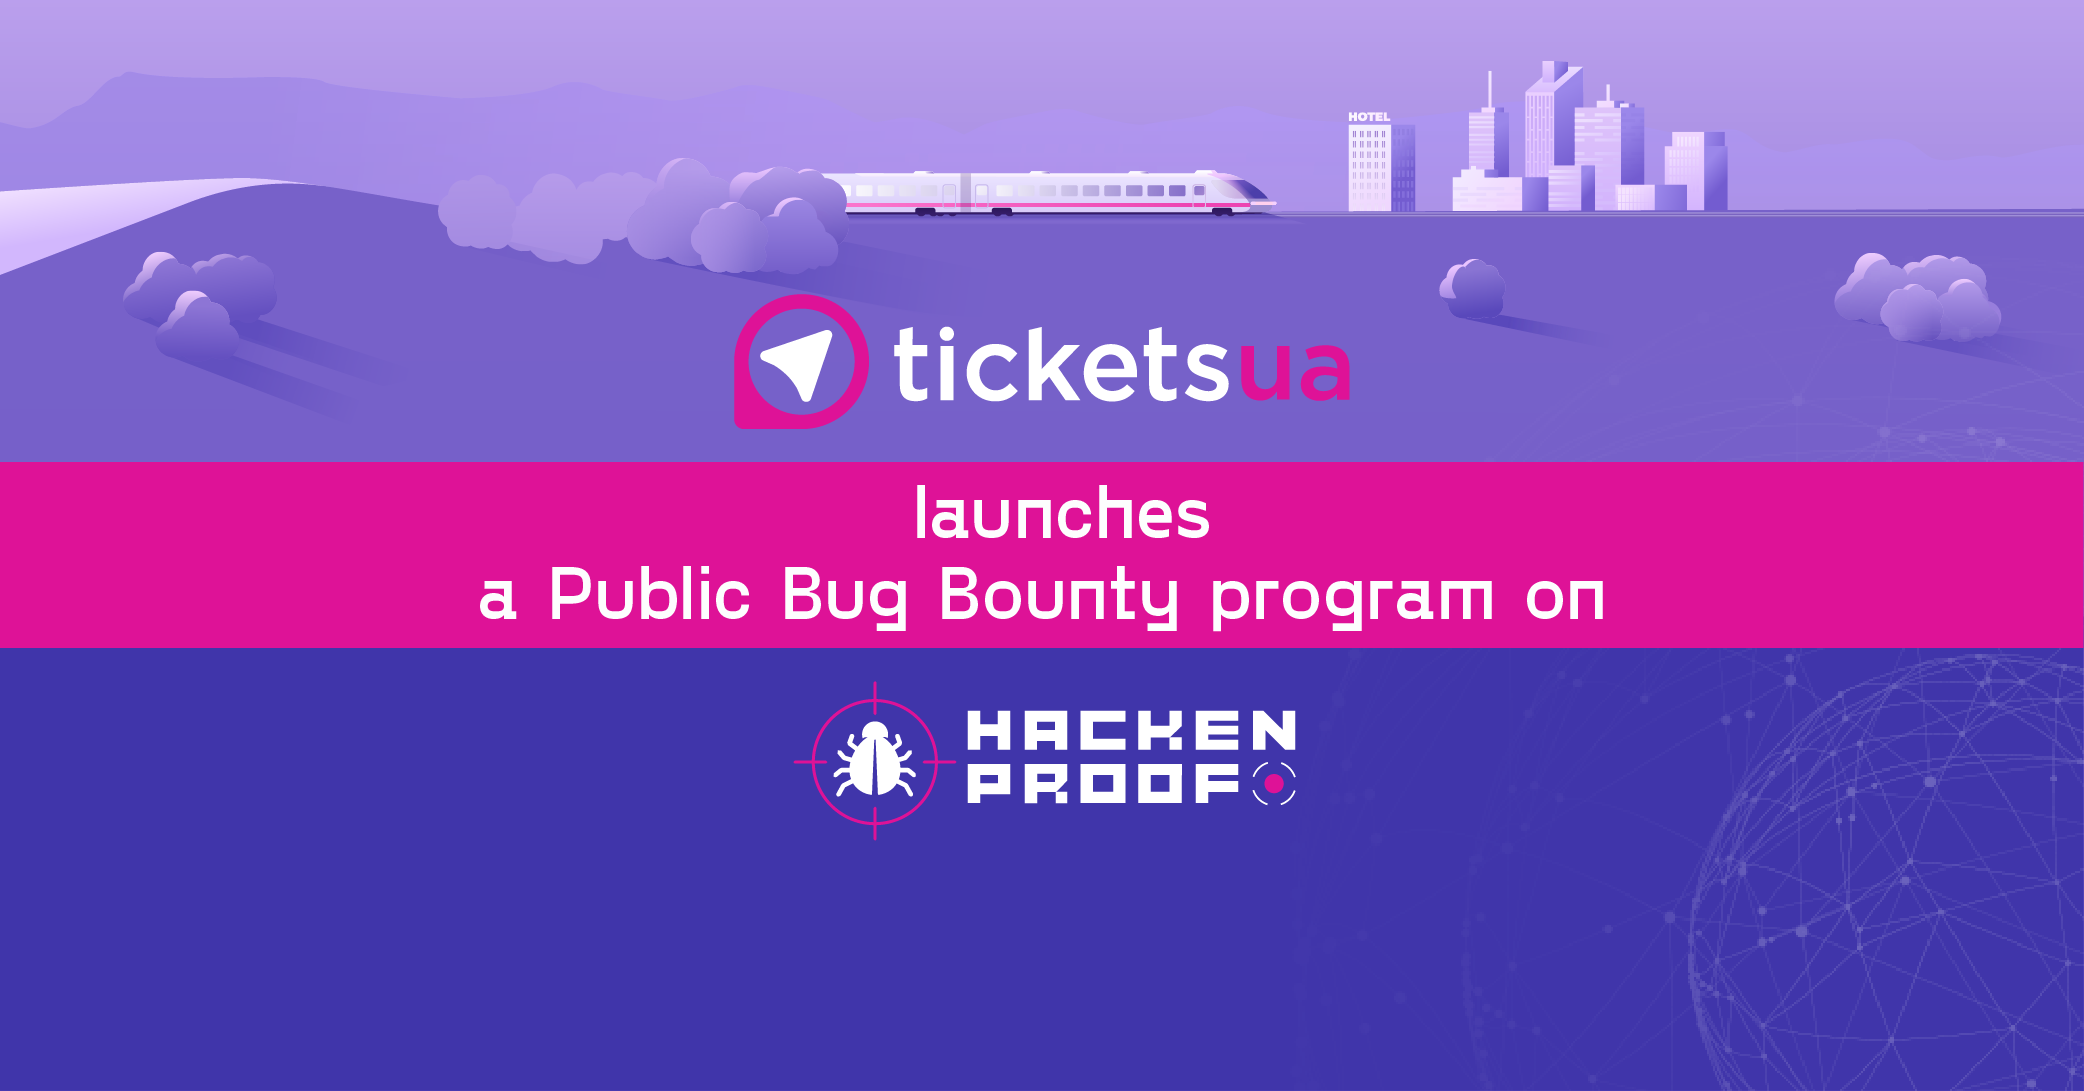 Tickets Travel Network is launching a public program on Hackenproof after a year of extensive testing in private mode.